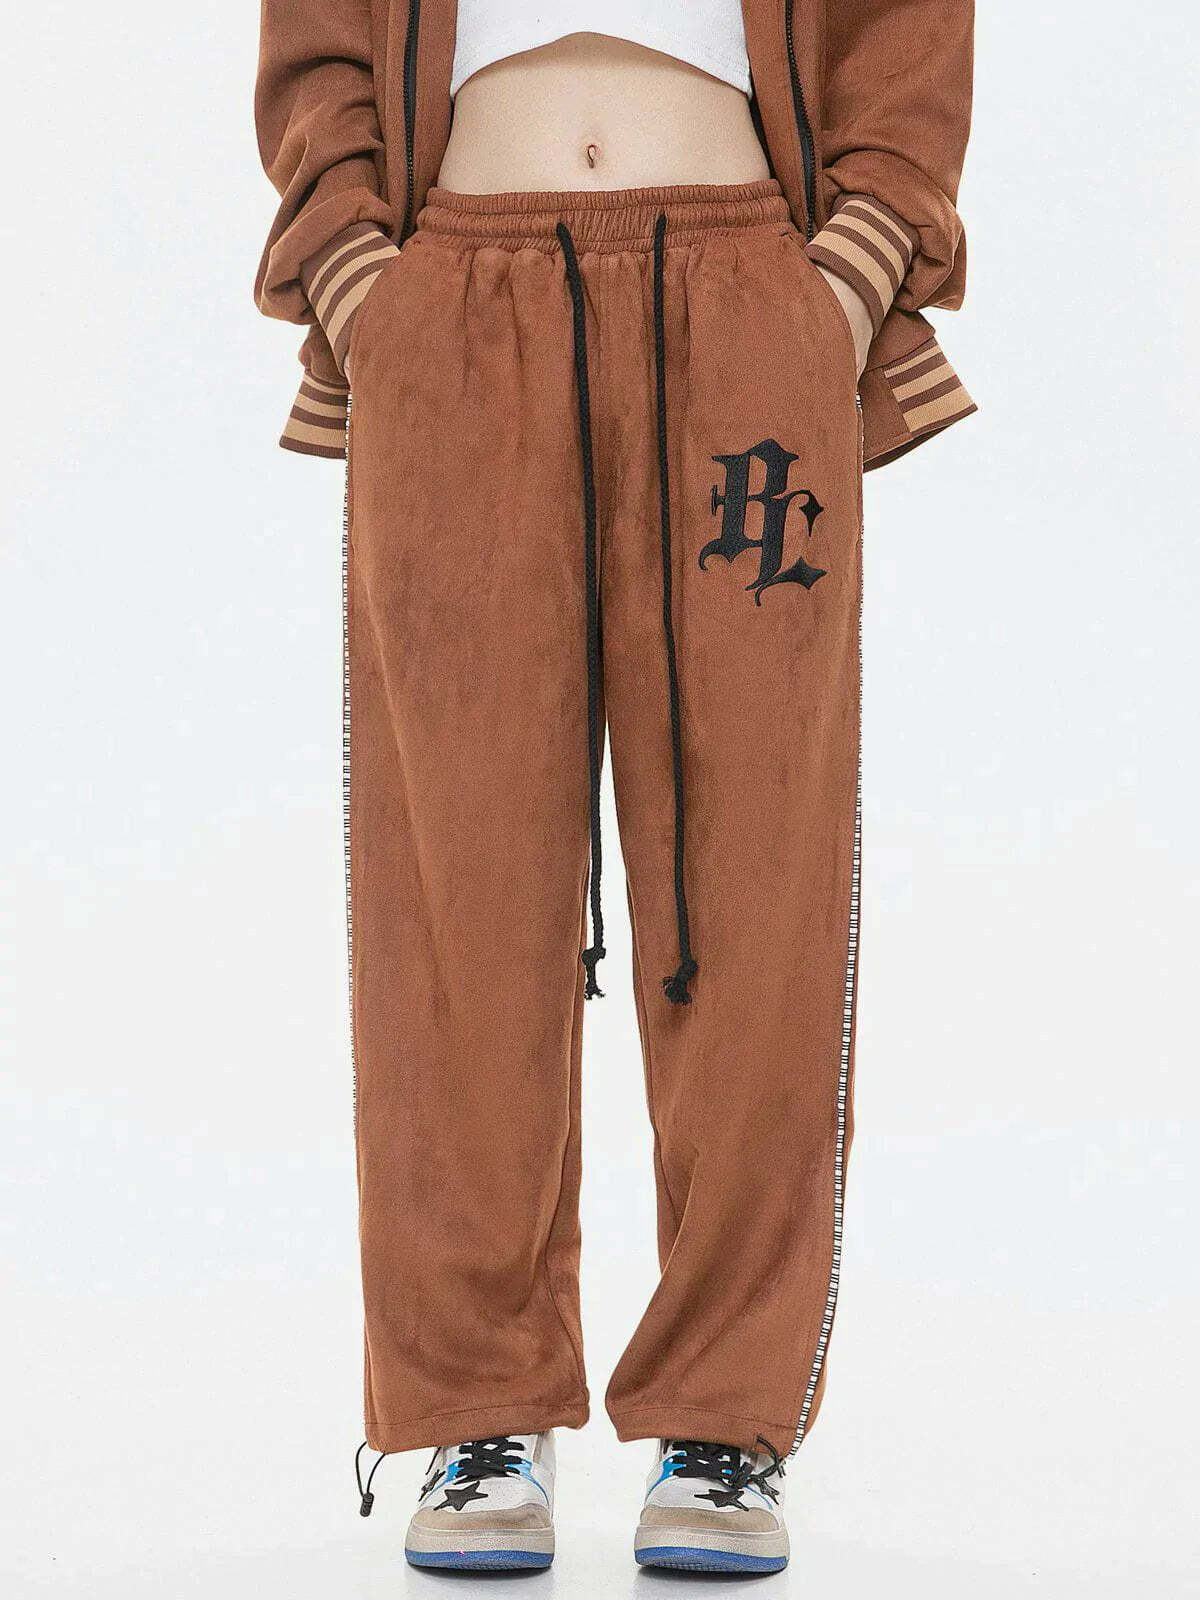 gothic letter embroidered pants edgy streetwear statement 6821